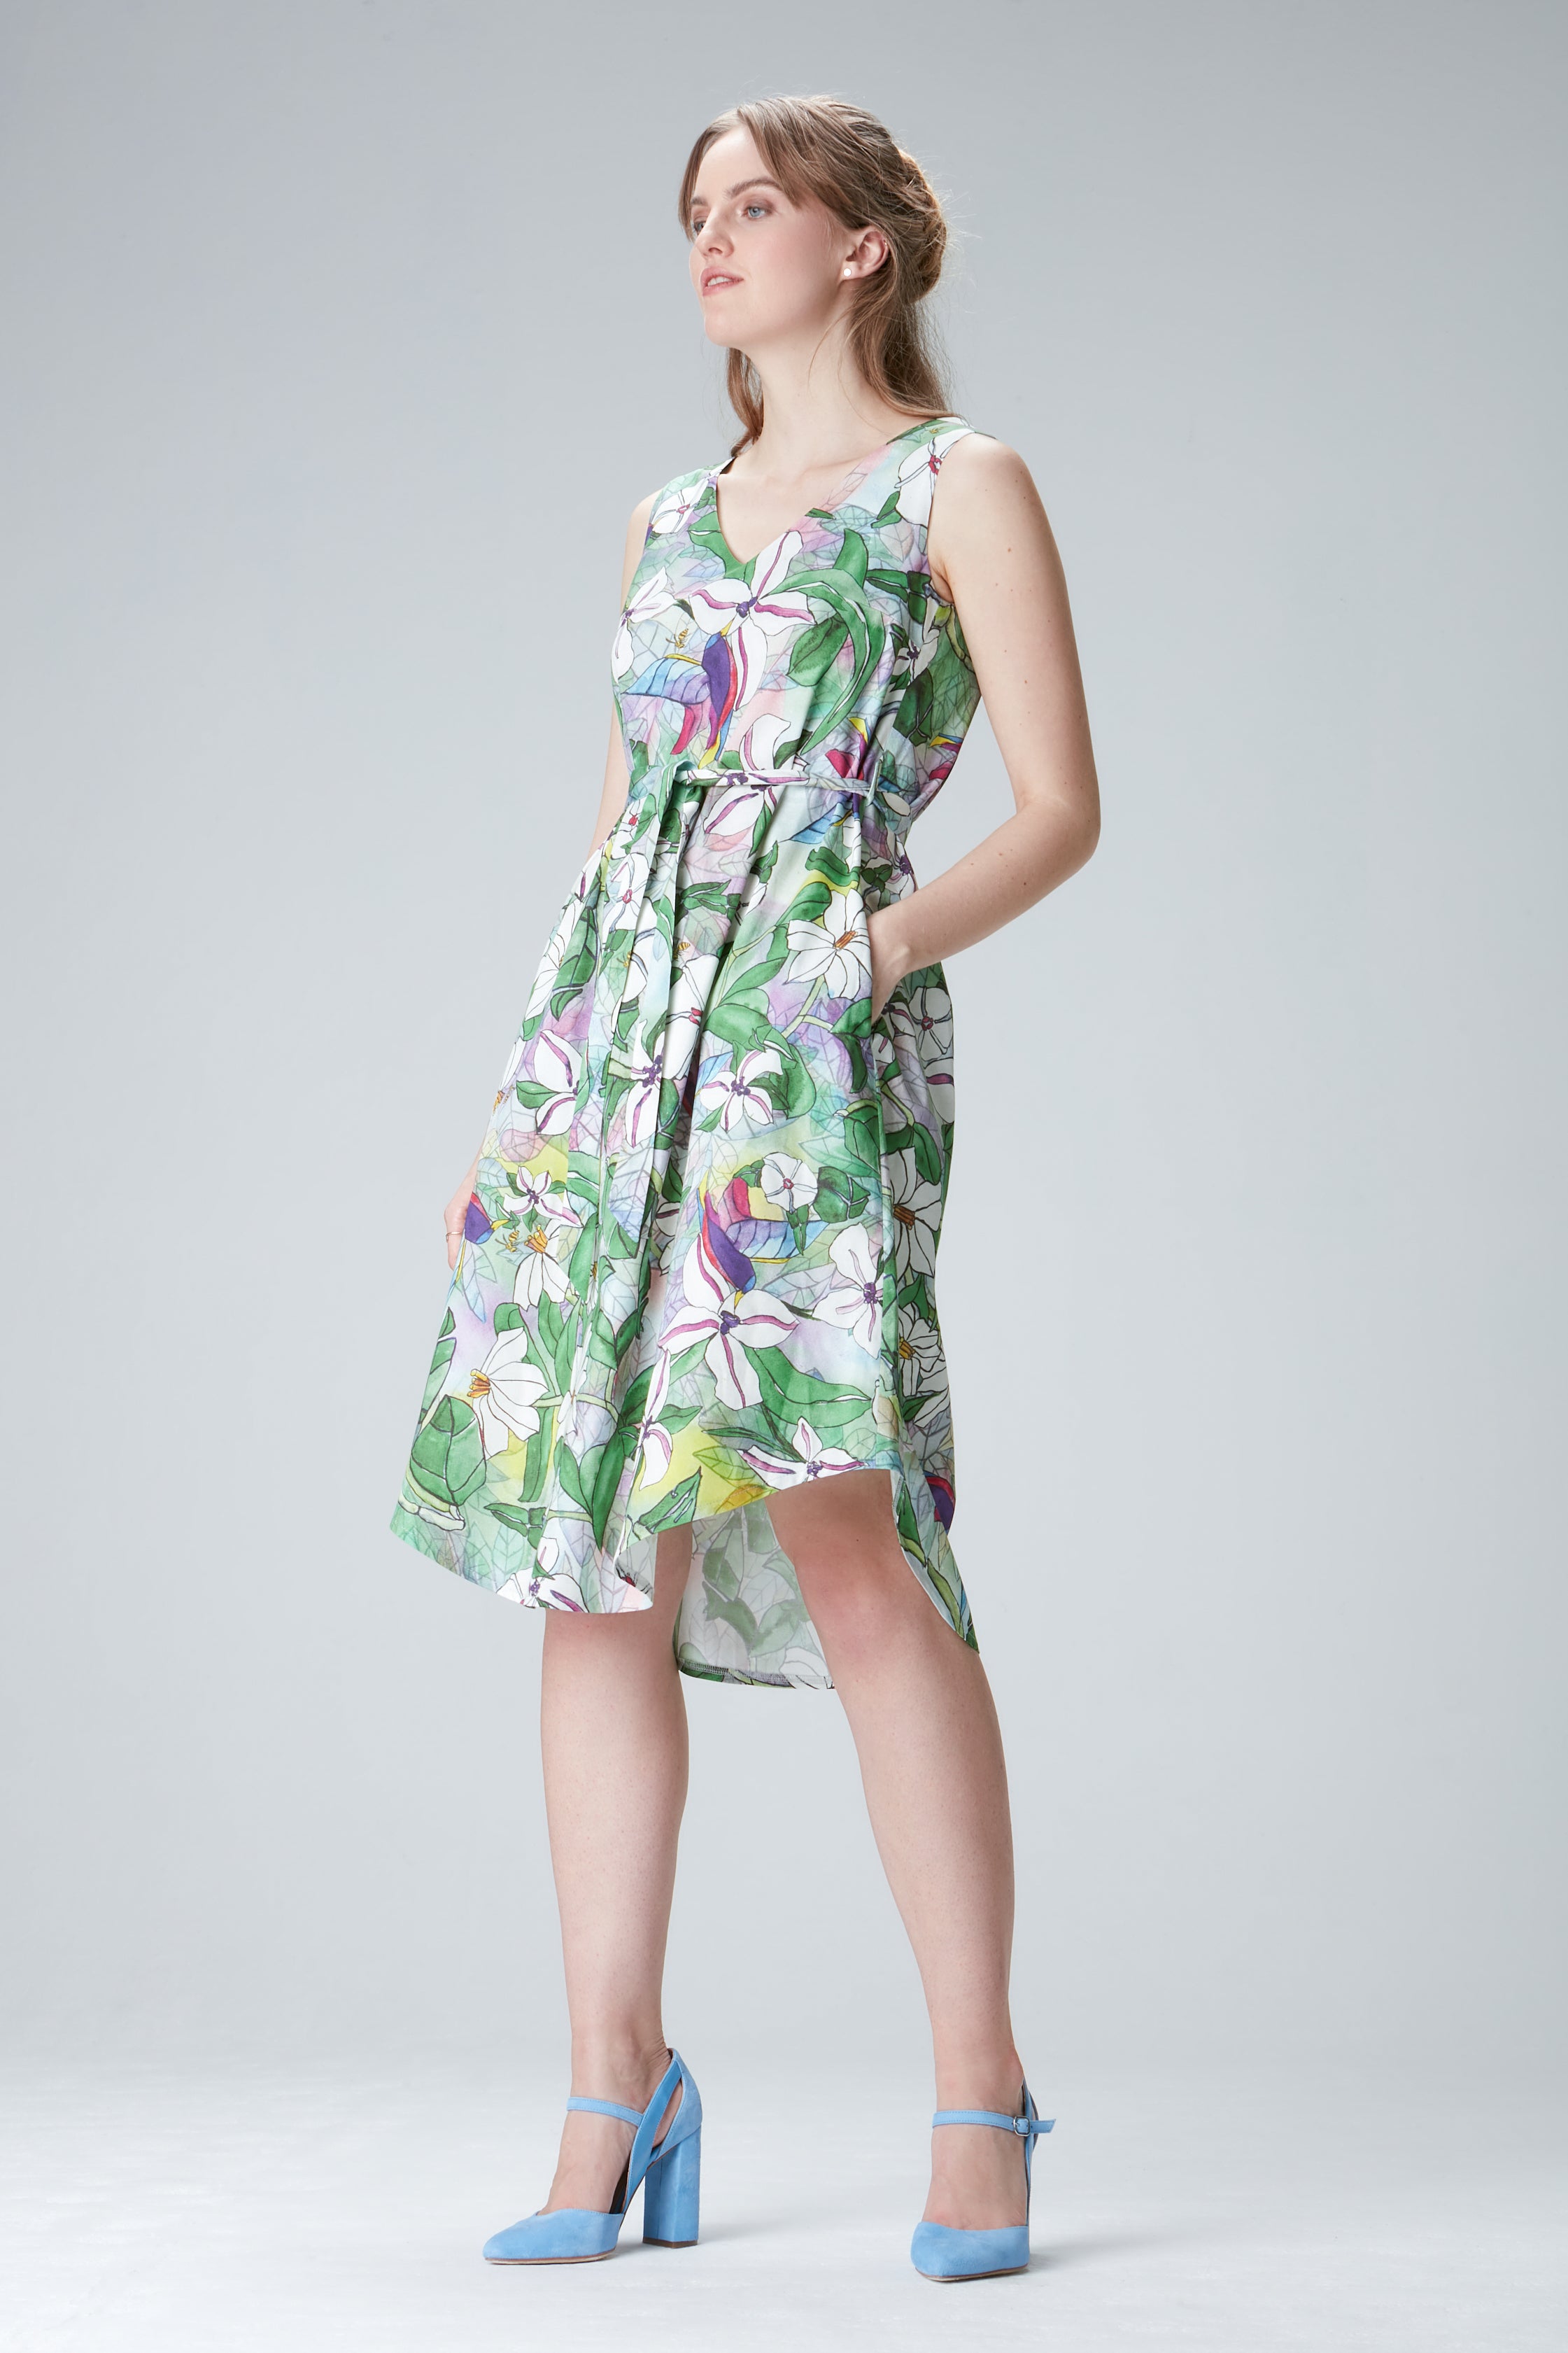 Floral dress "LOT-TAA" made of lyocell and cotton